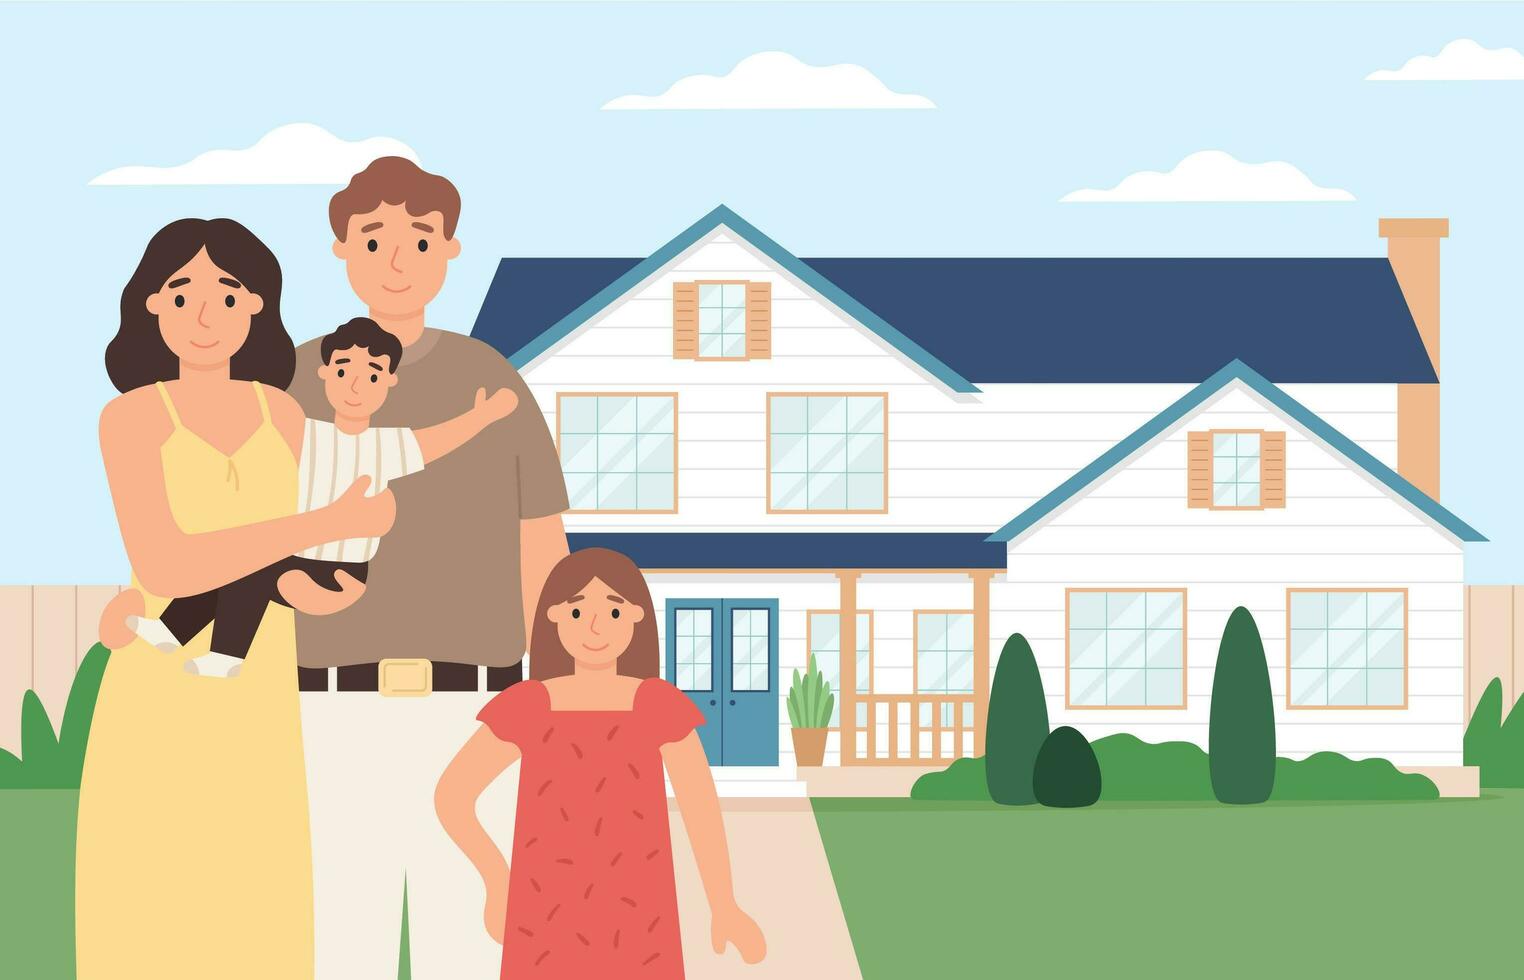 Happy family home. Young couple with kids in front of their house, real estate vector illustration